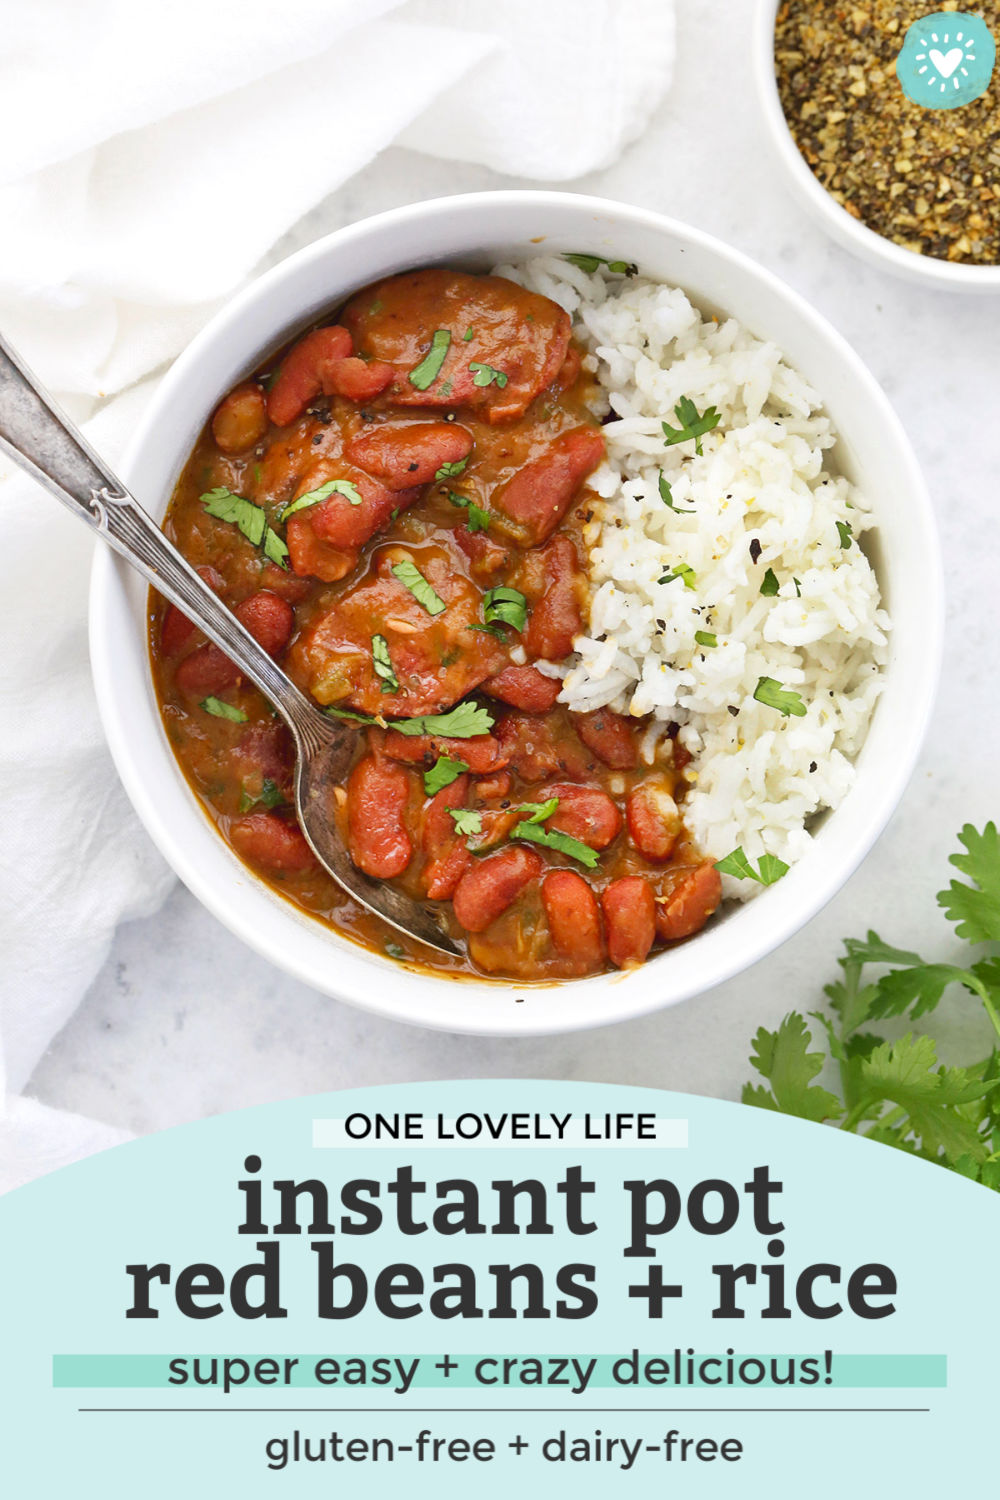 Overhead view of Instant Pot Red Beans and Rice in a bowl garnished with fresh herbs with text overlay that reads "One Lovely Life Instant Pot Red Beans + Rice. Super Easy + Crazy Delicious! Gluten-free + dairy-free"